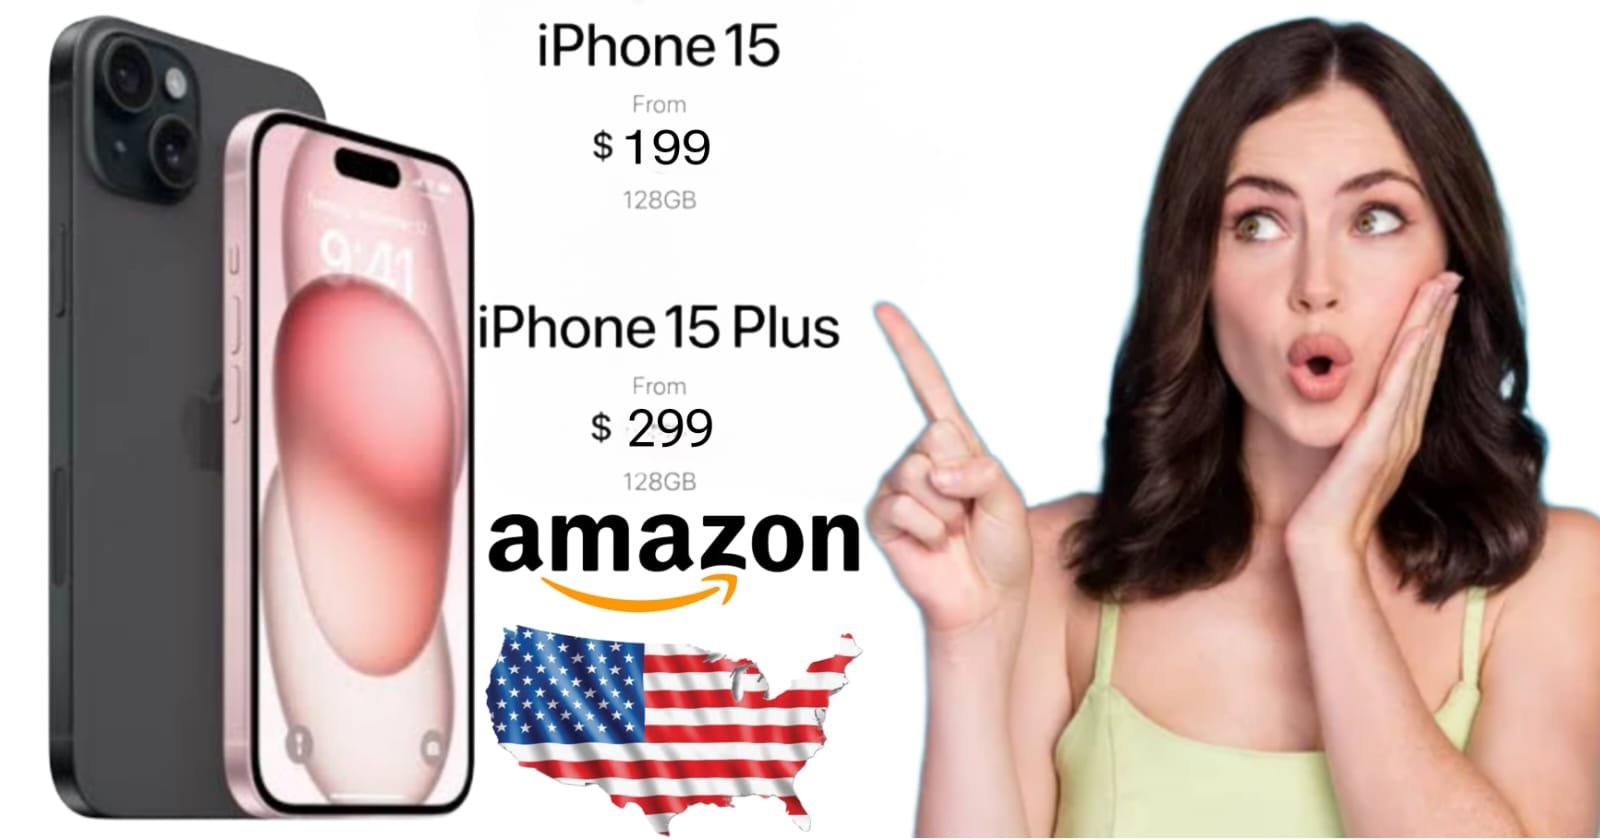 IPhone 15 $199 only